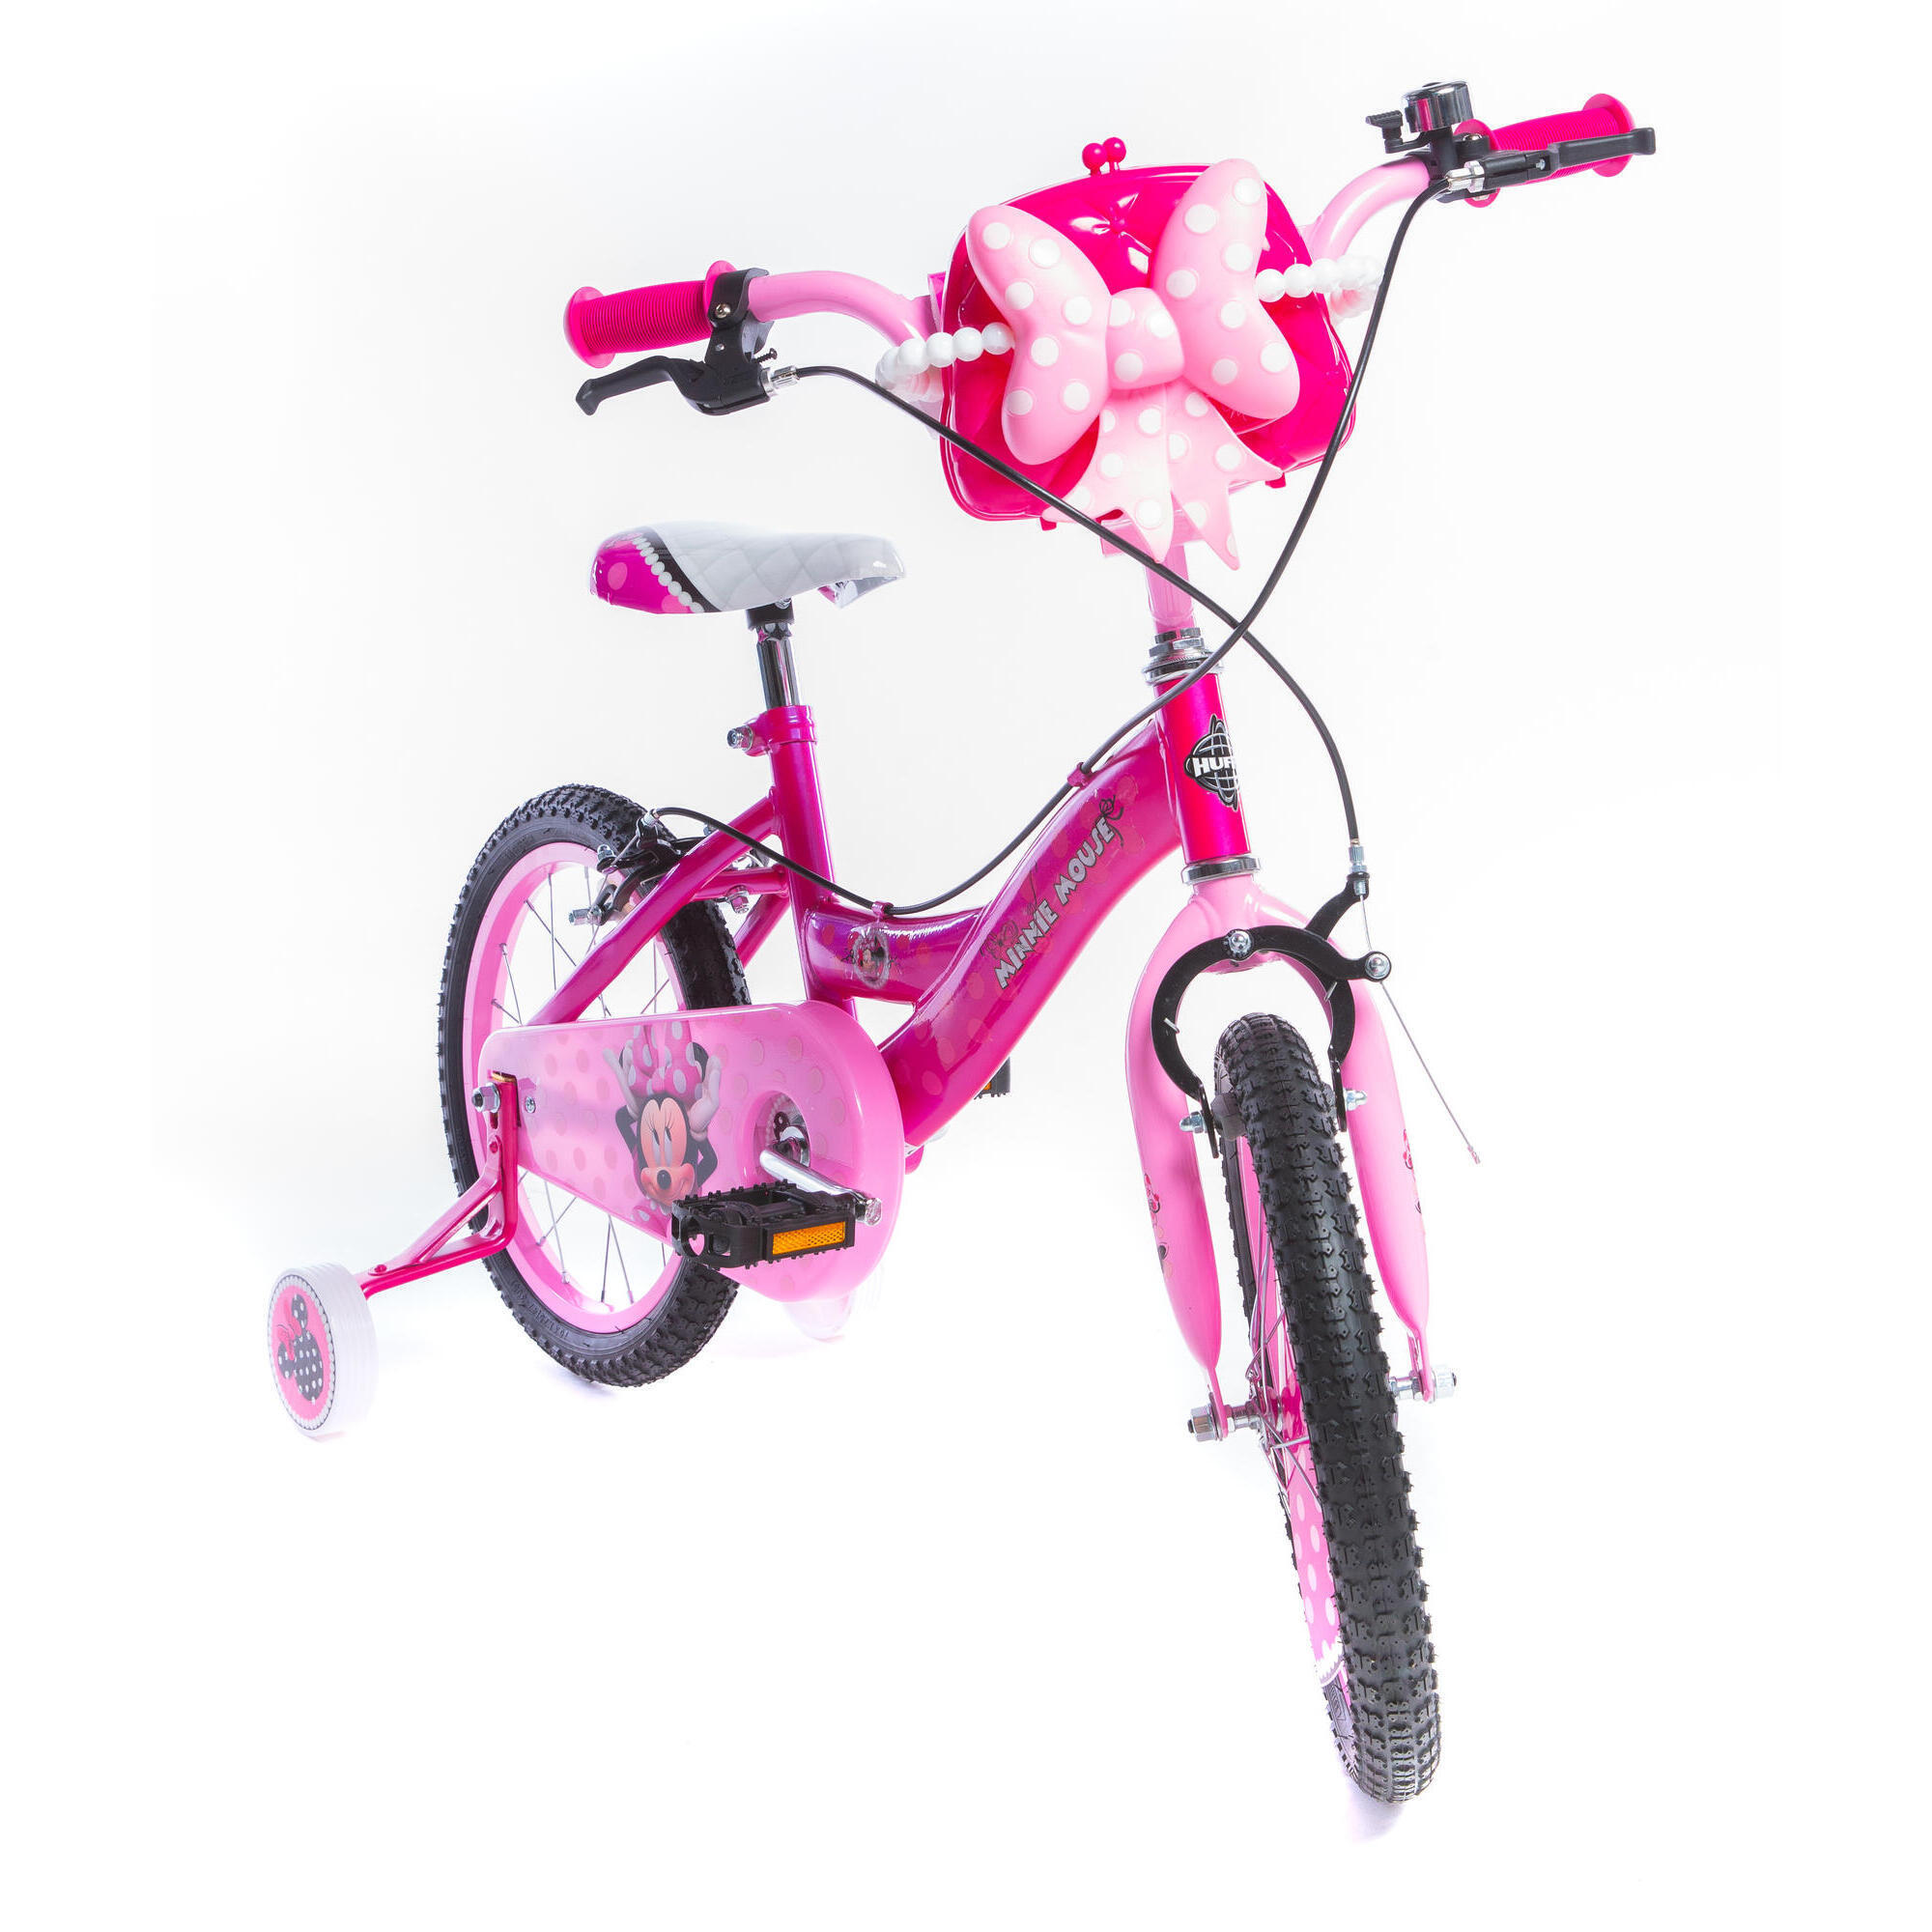 Huffy Disney Minnie Mouse Kids Bike 16 Inch Pink For 5-7 Year Old + stabilisers 5/8